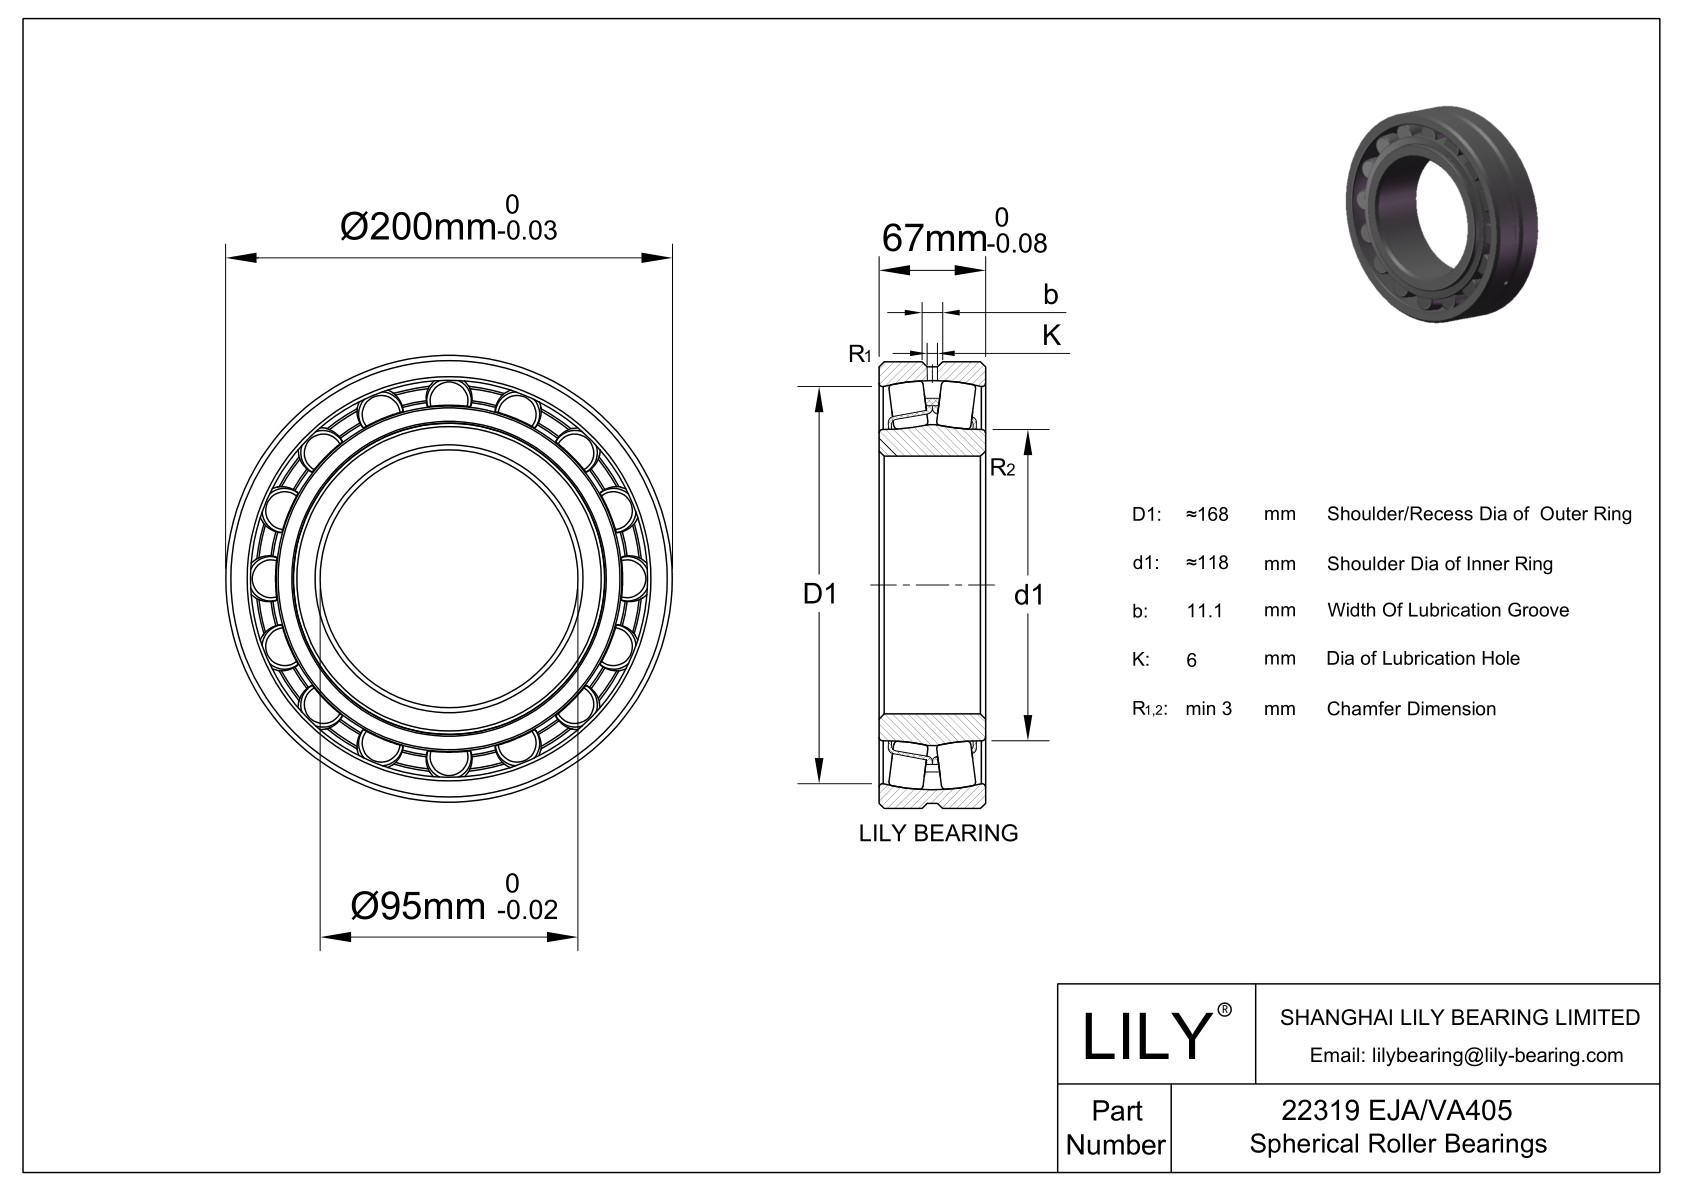 22319 EJA/VA405 Double Row Spherical Roller Bearing cad drawing